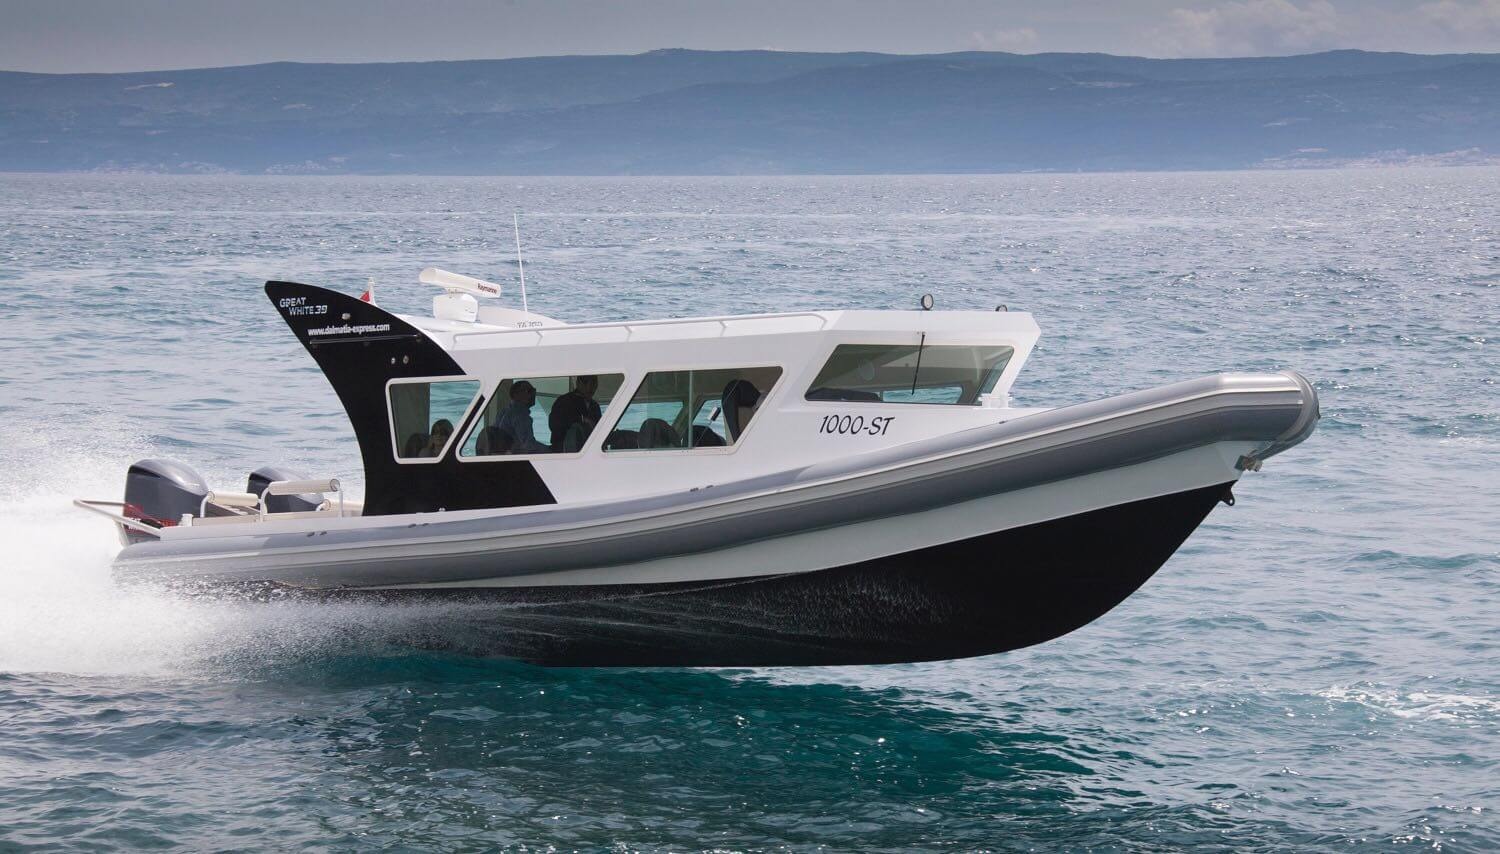 Great White 39 - Speed Boat - Driving On Sea at Fast Speed